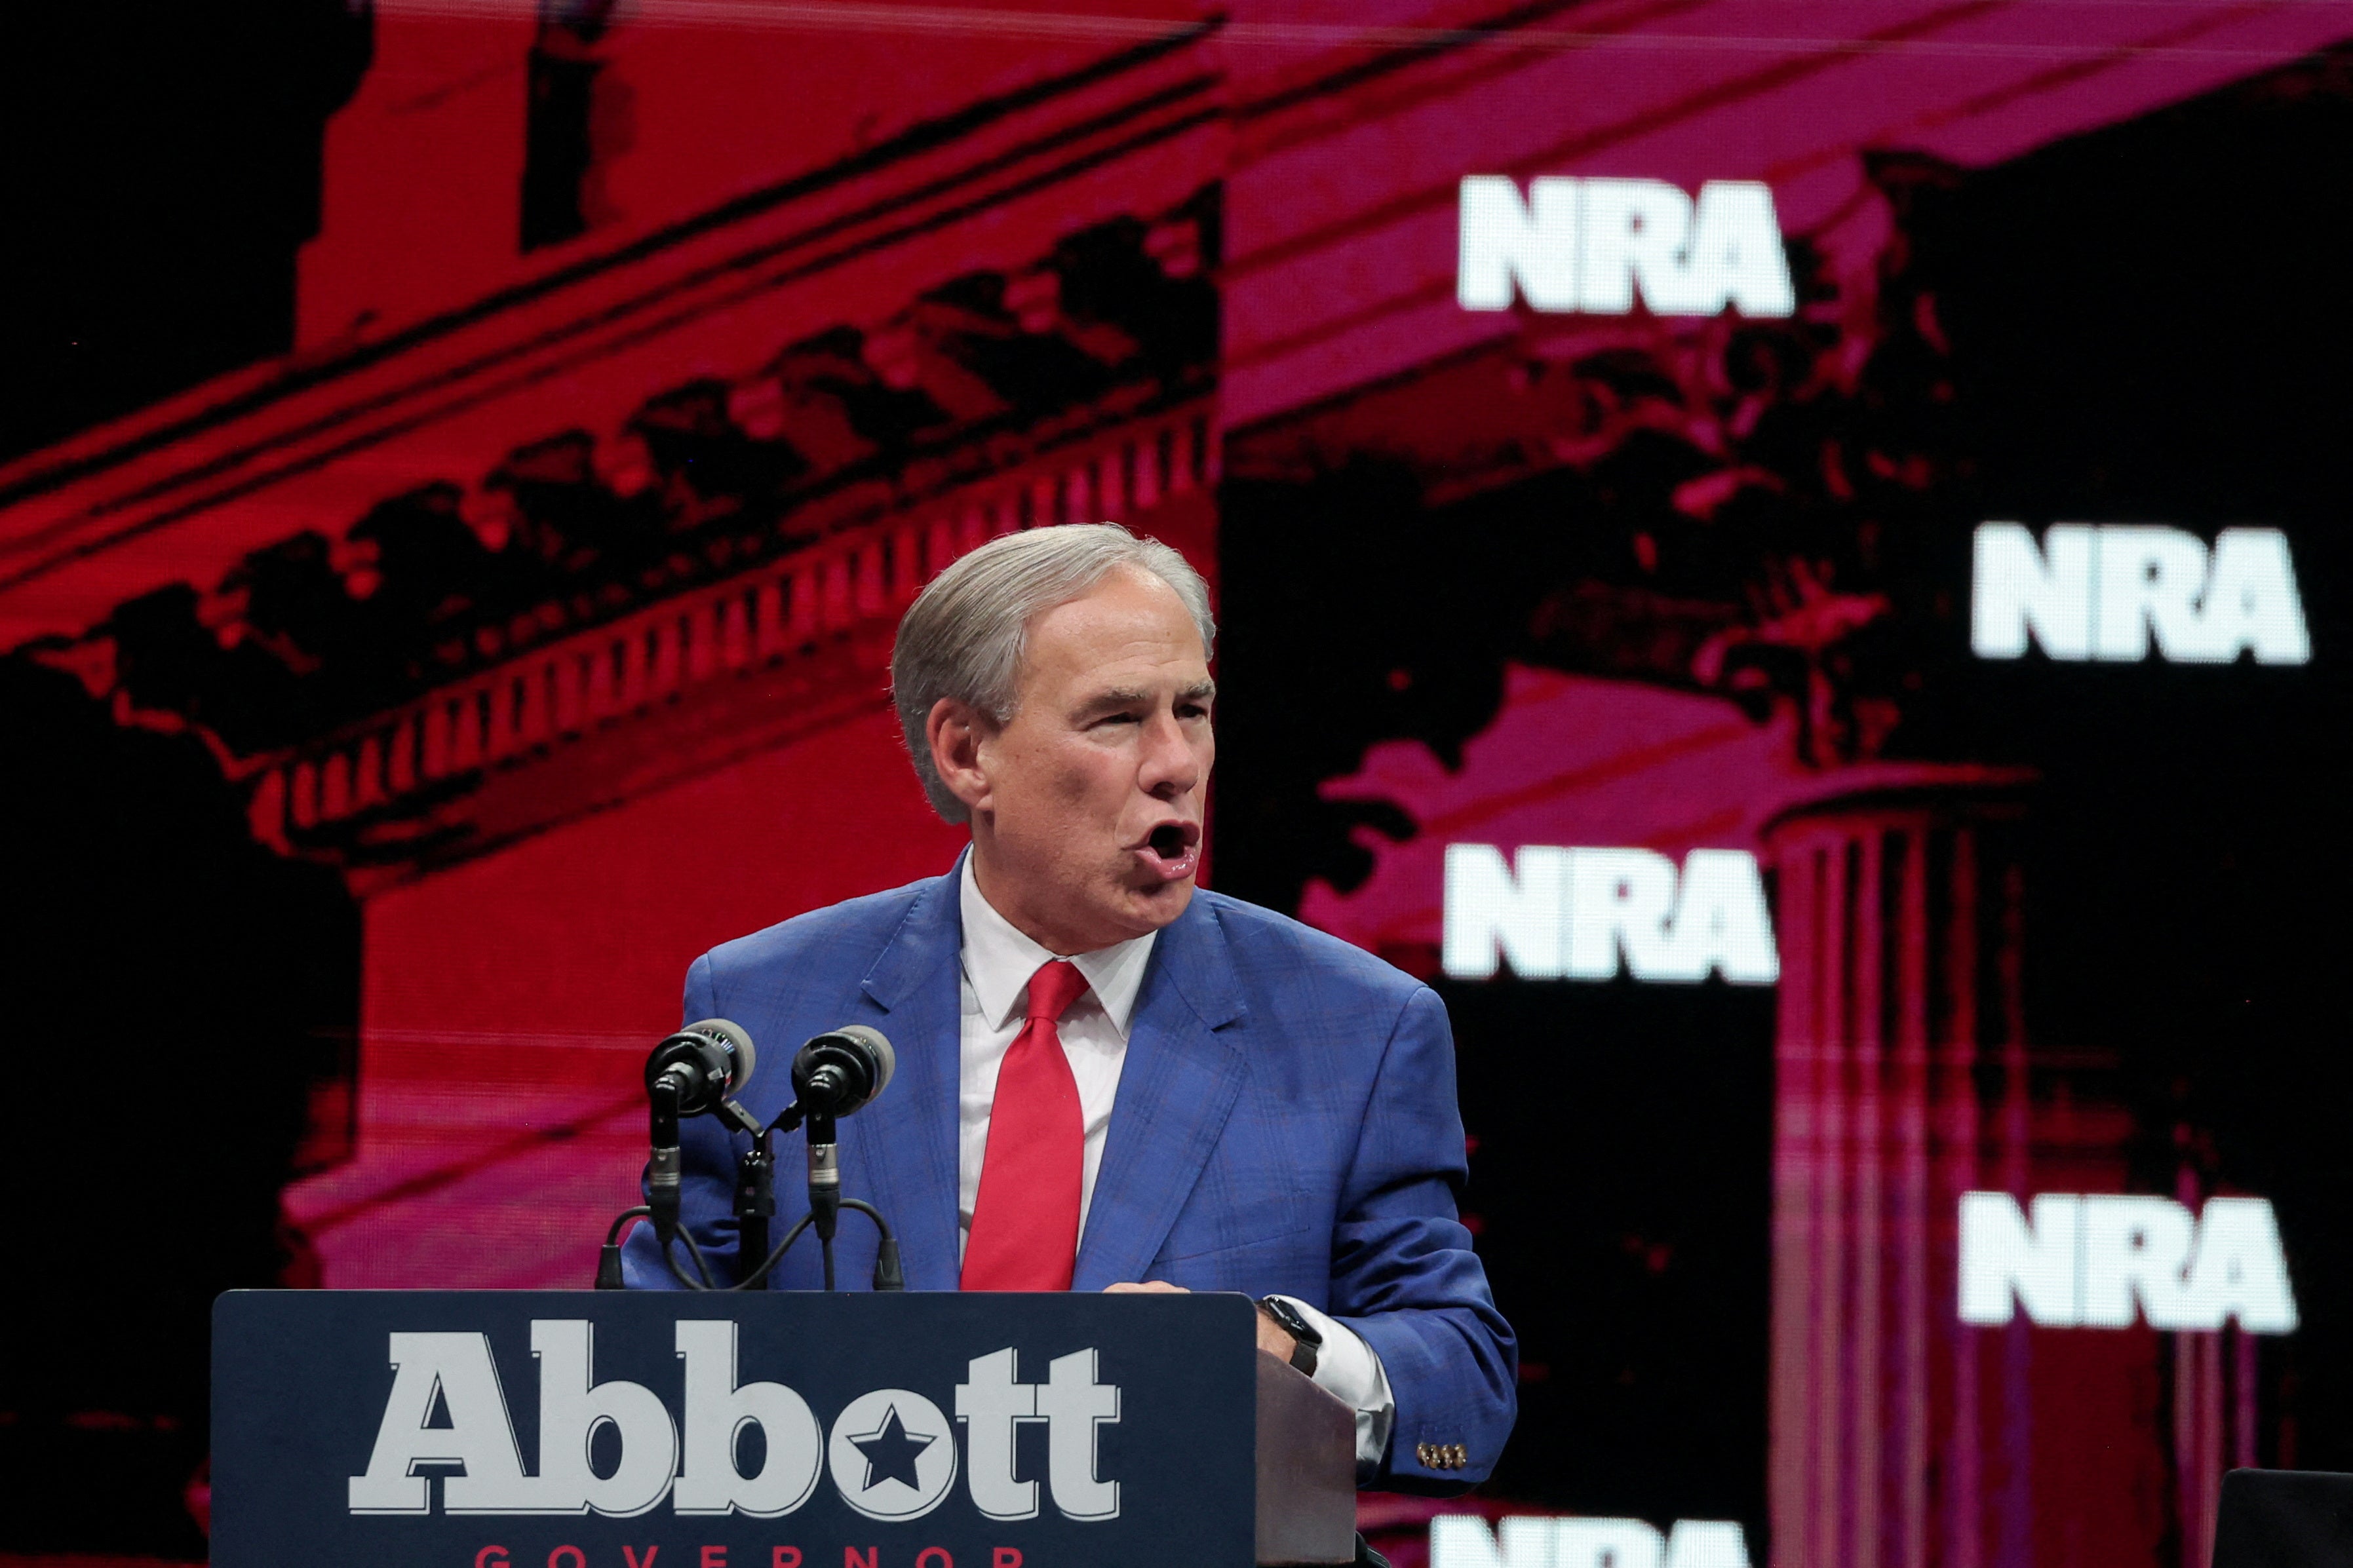 Texas Governor Greg Abbott speaks during the annual National Rifle Association meeting in Dallas on May 18